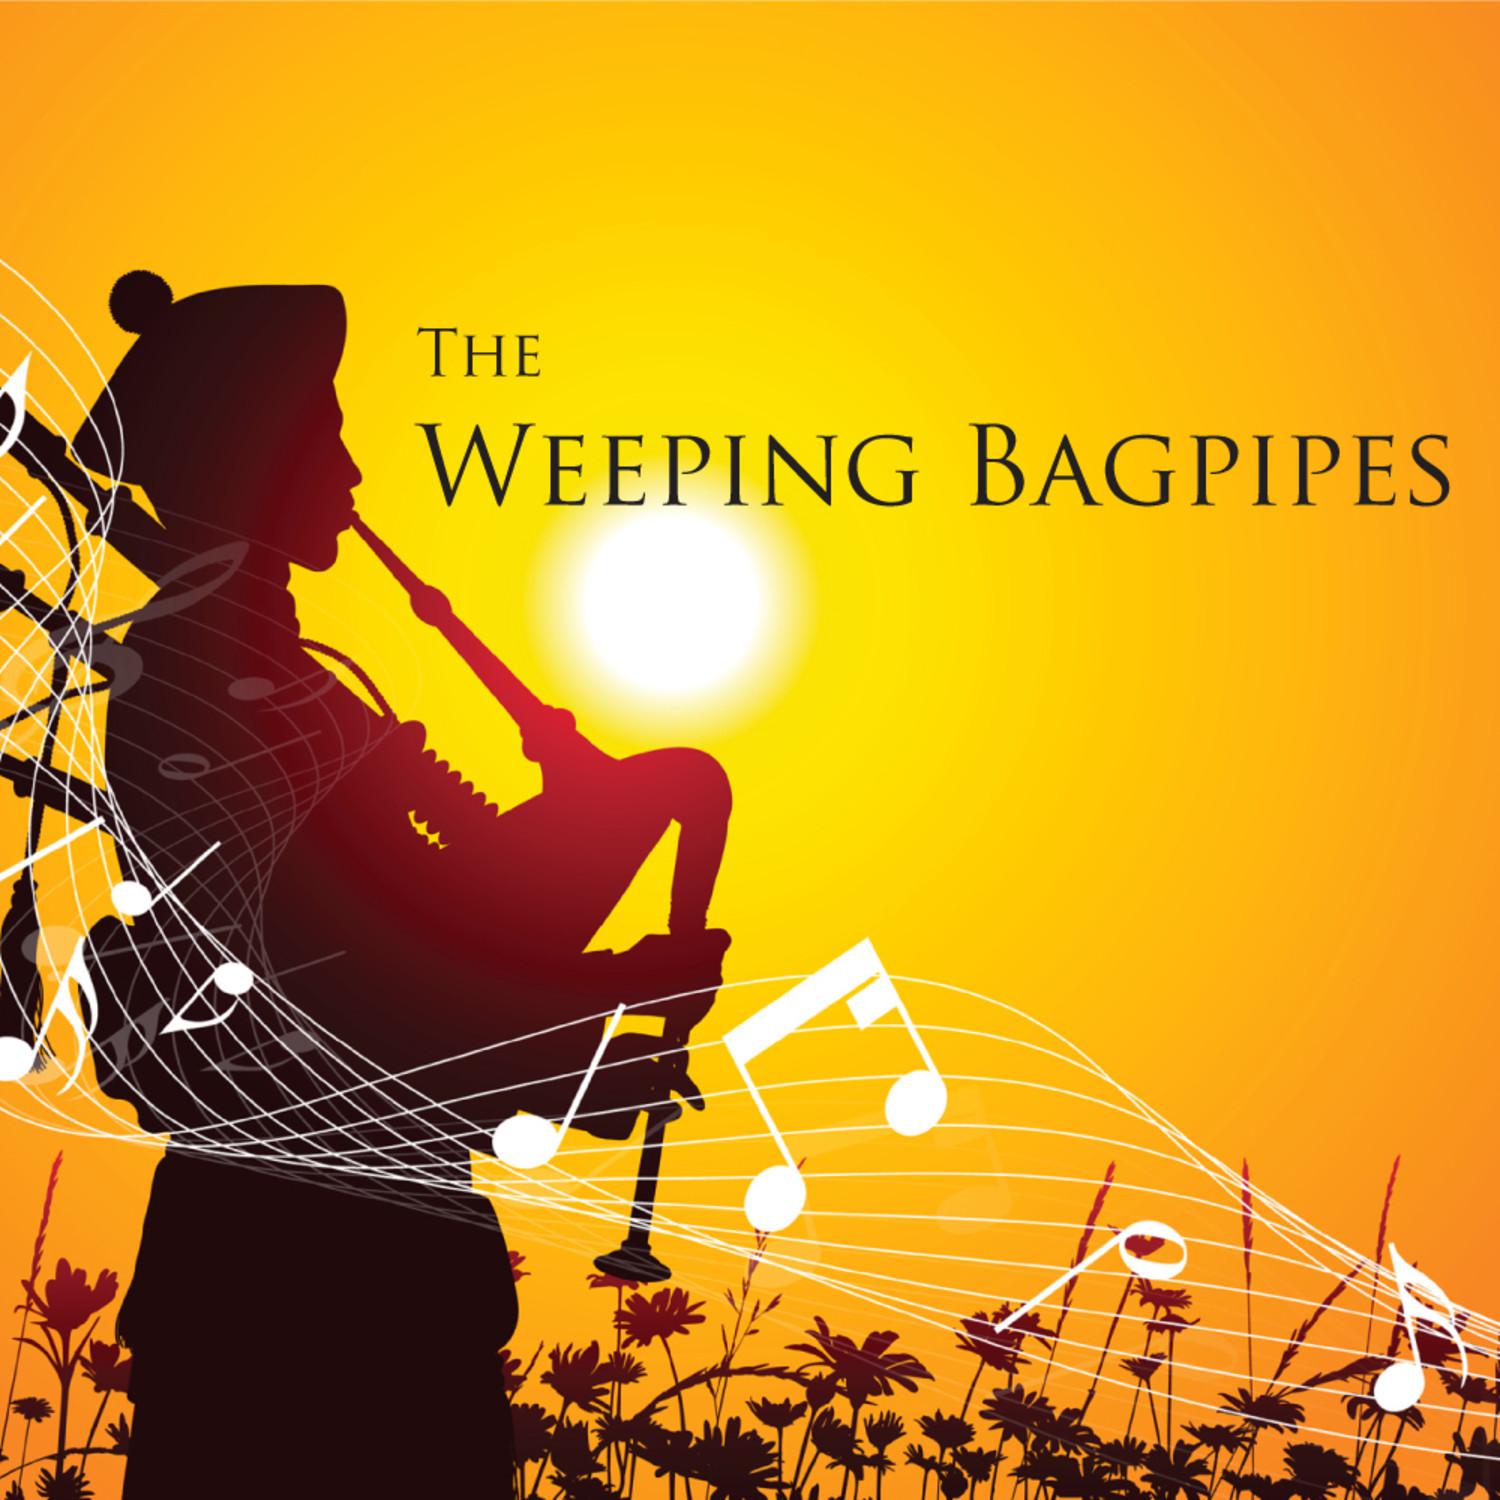 Weeping Bagpipes